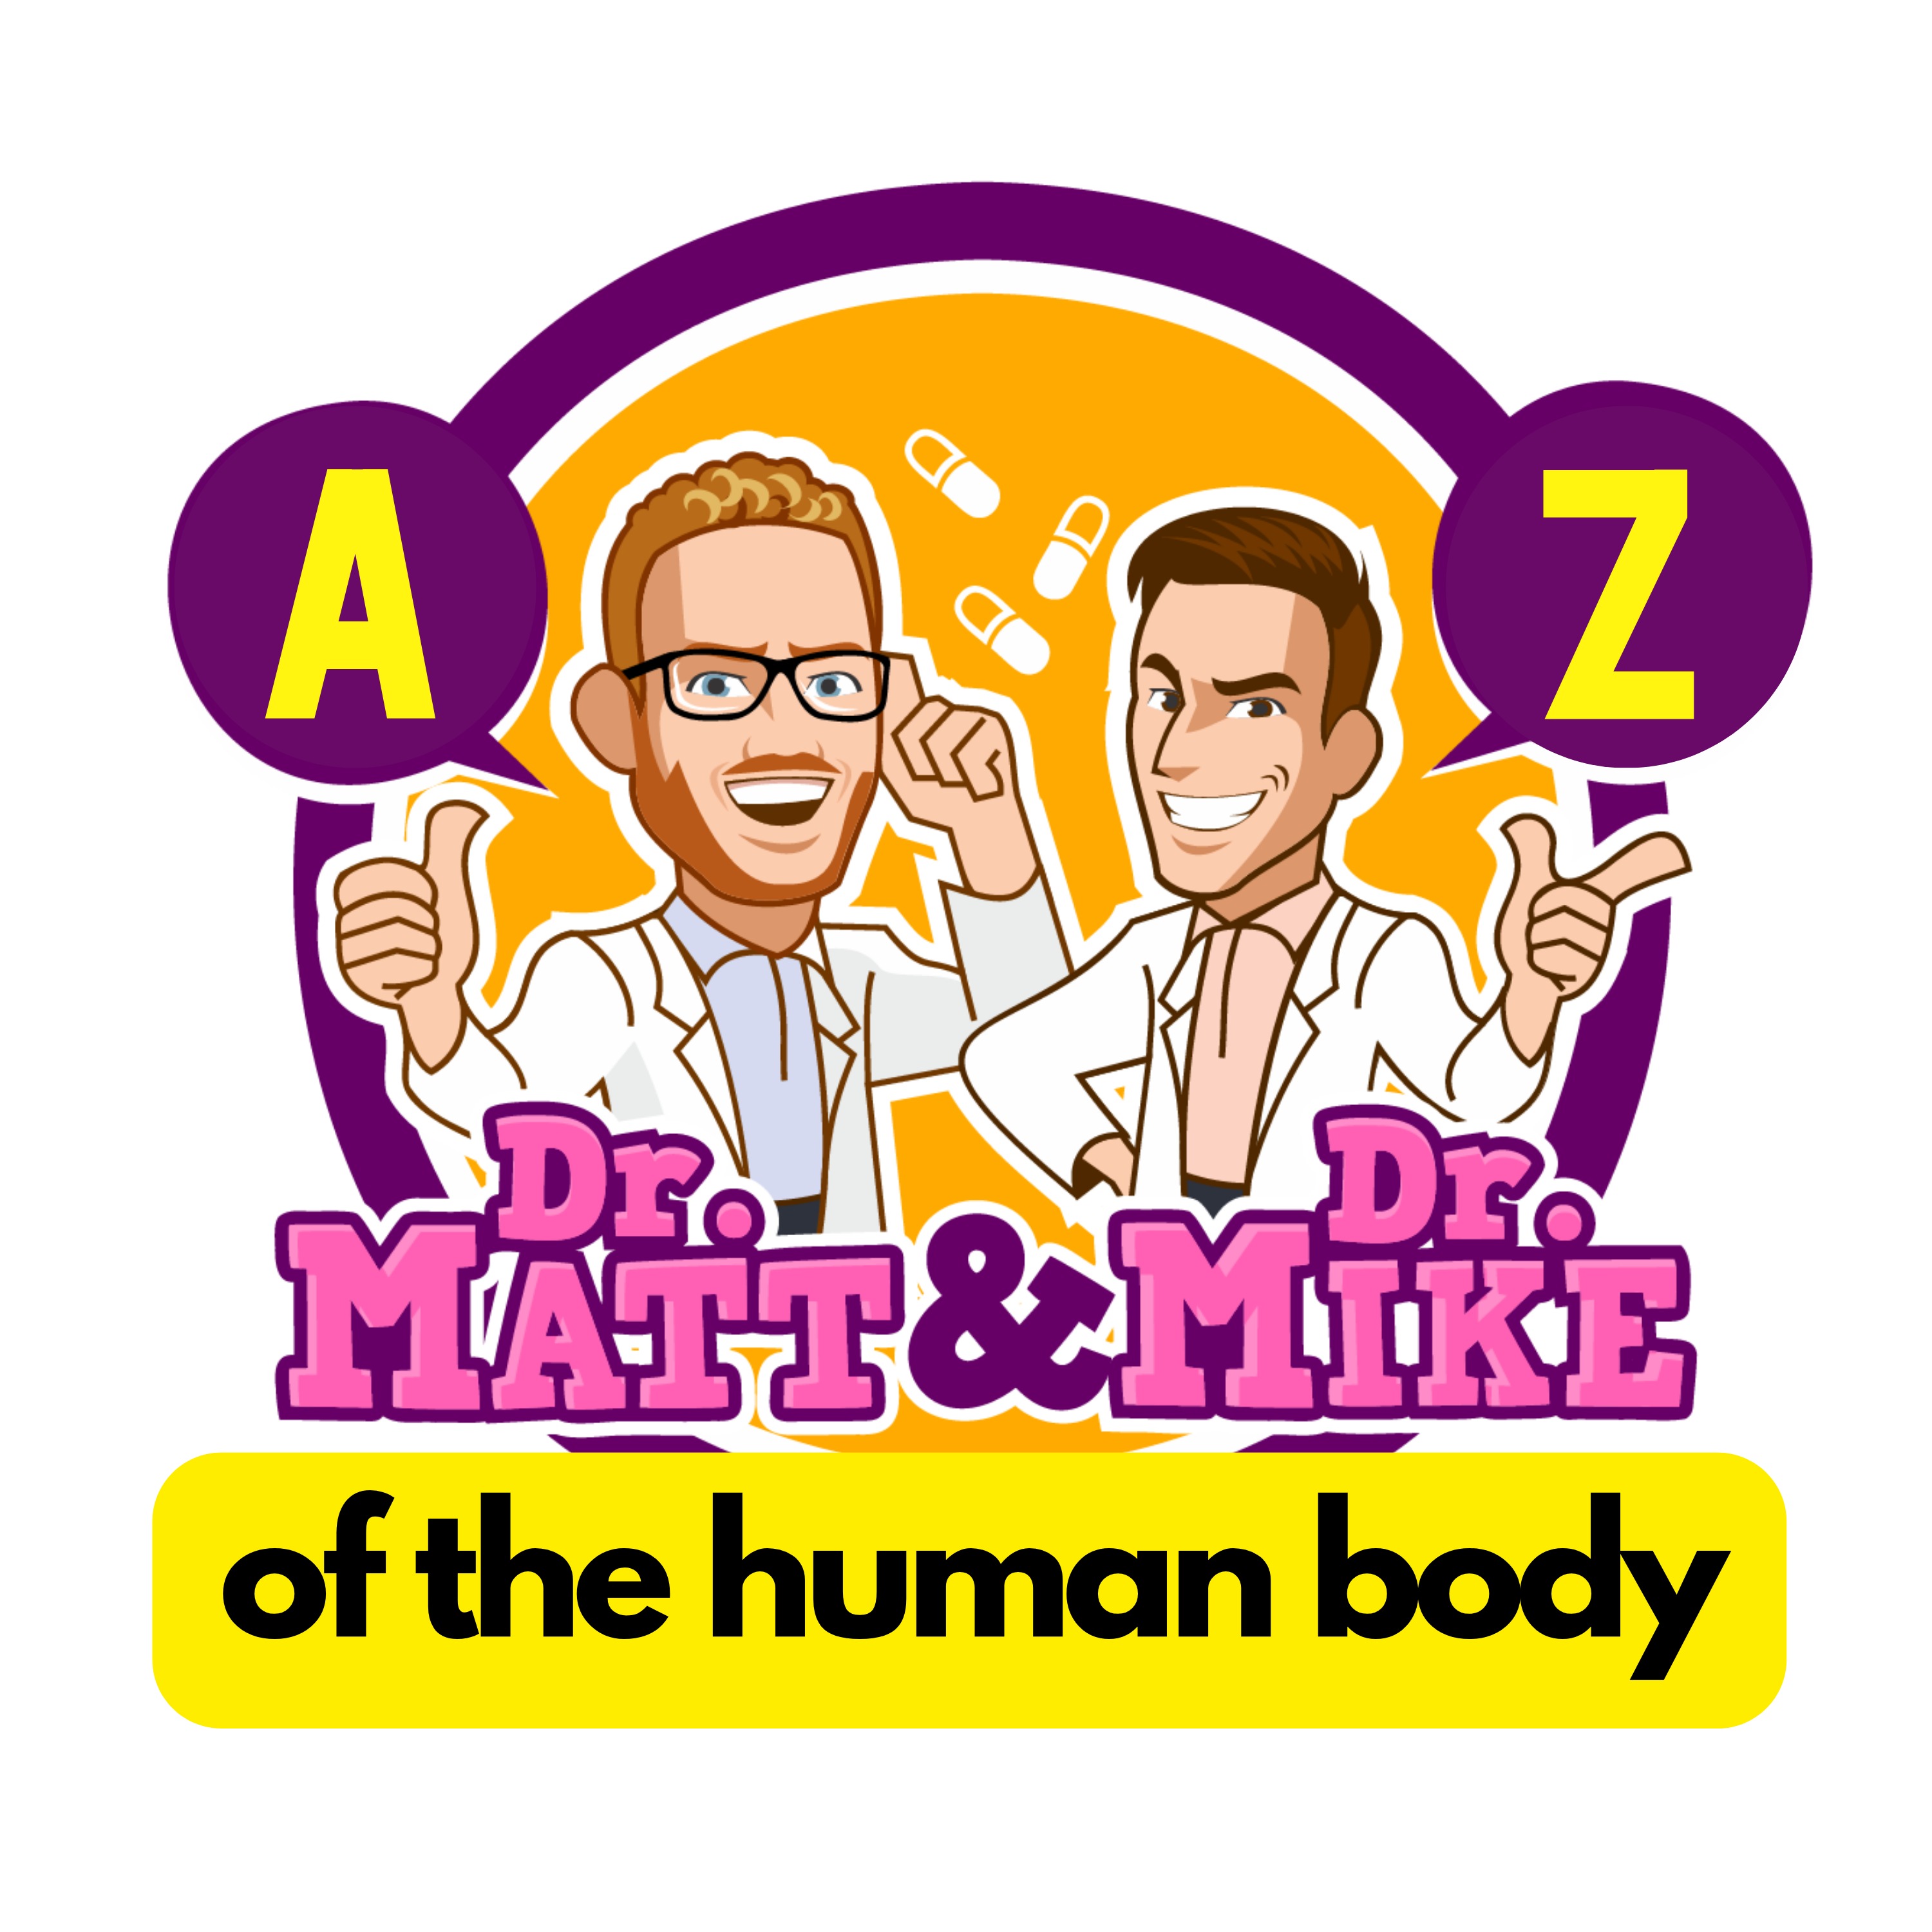 Allele | A-Z of the Human Body